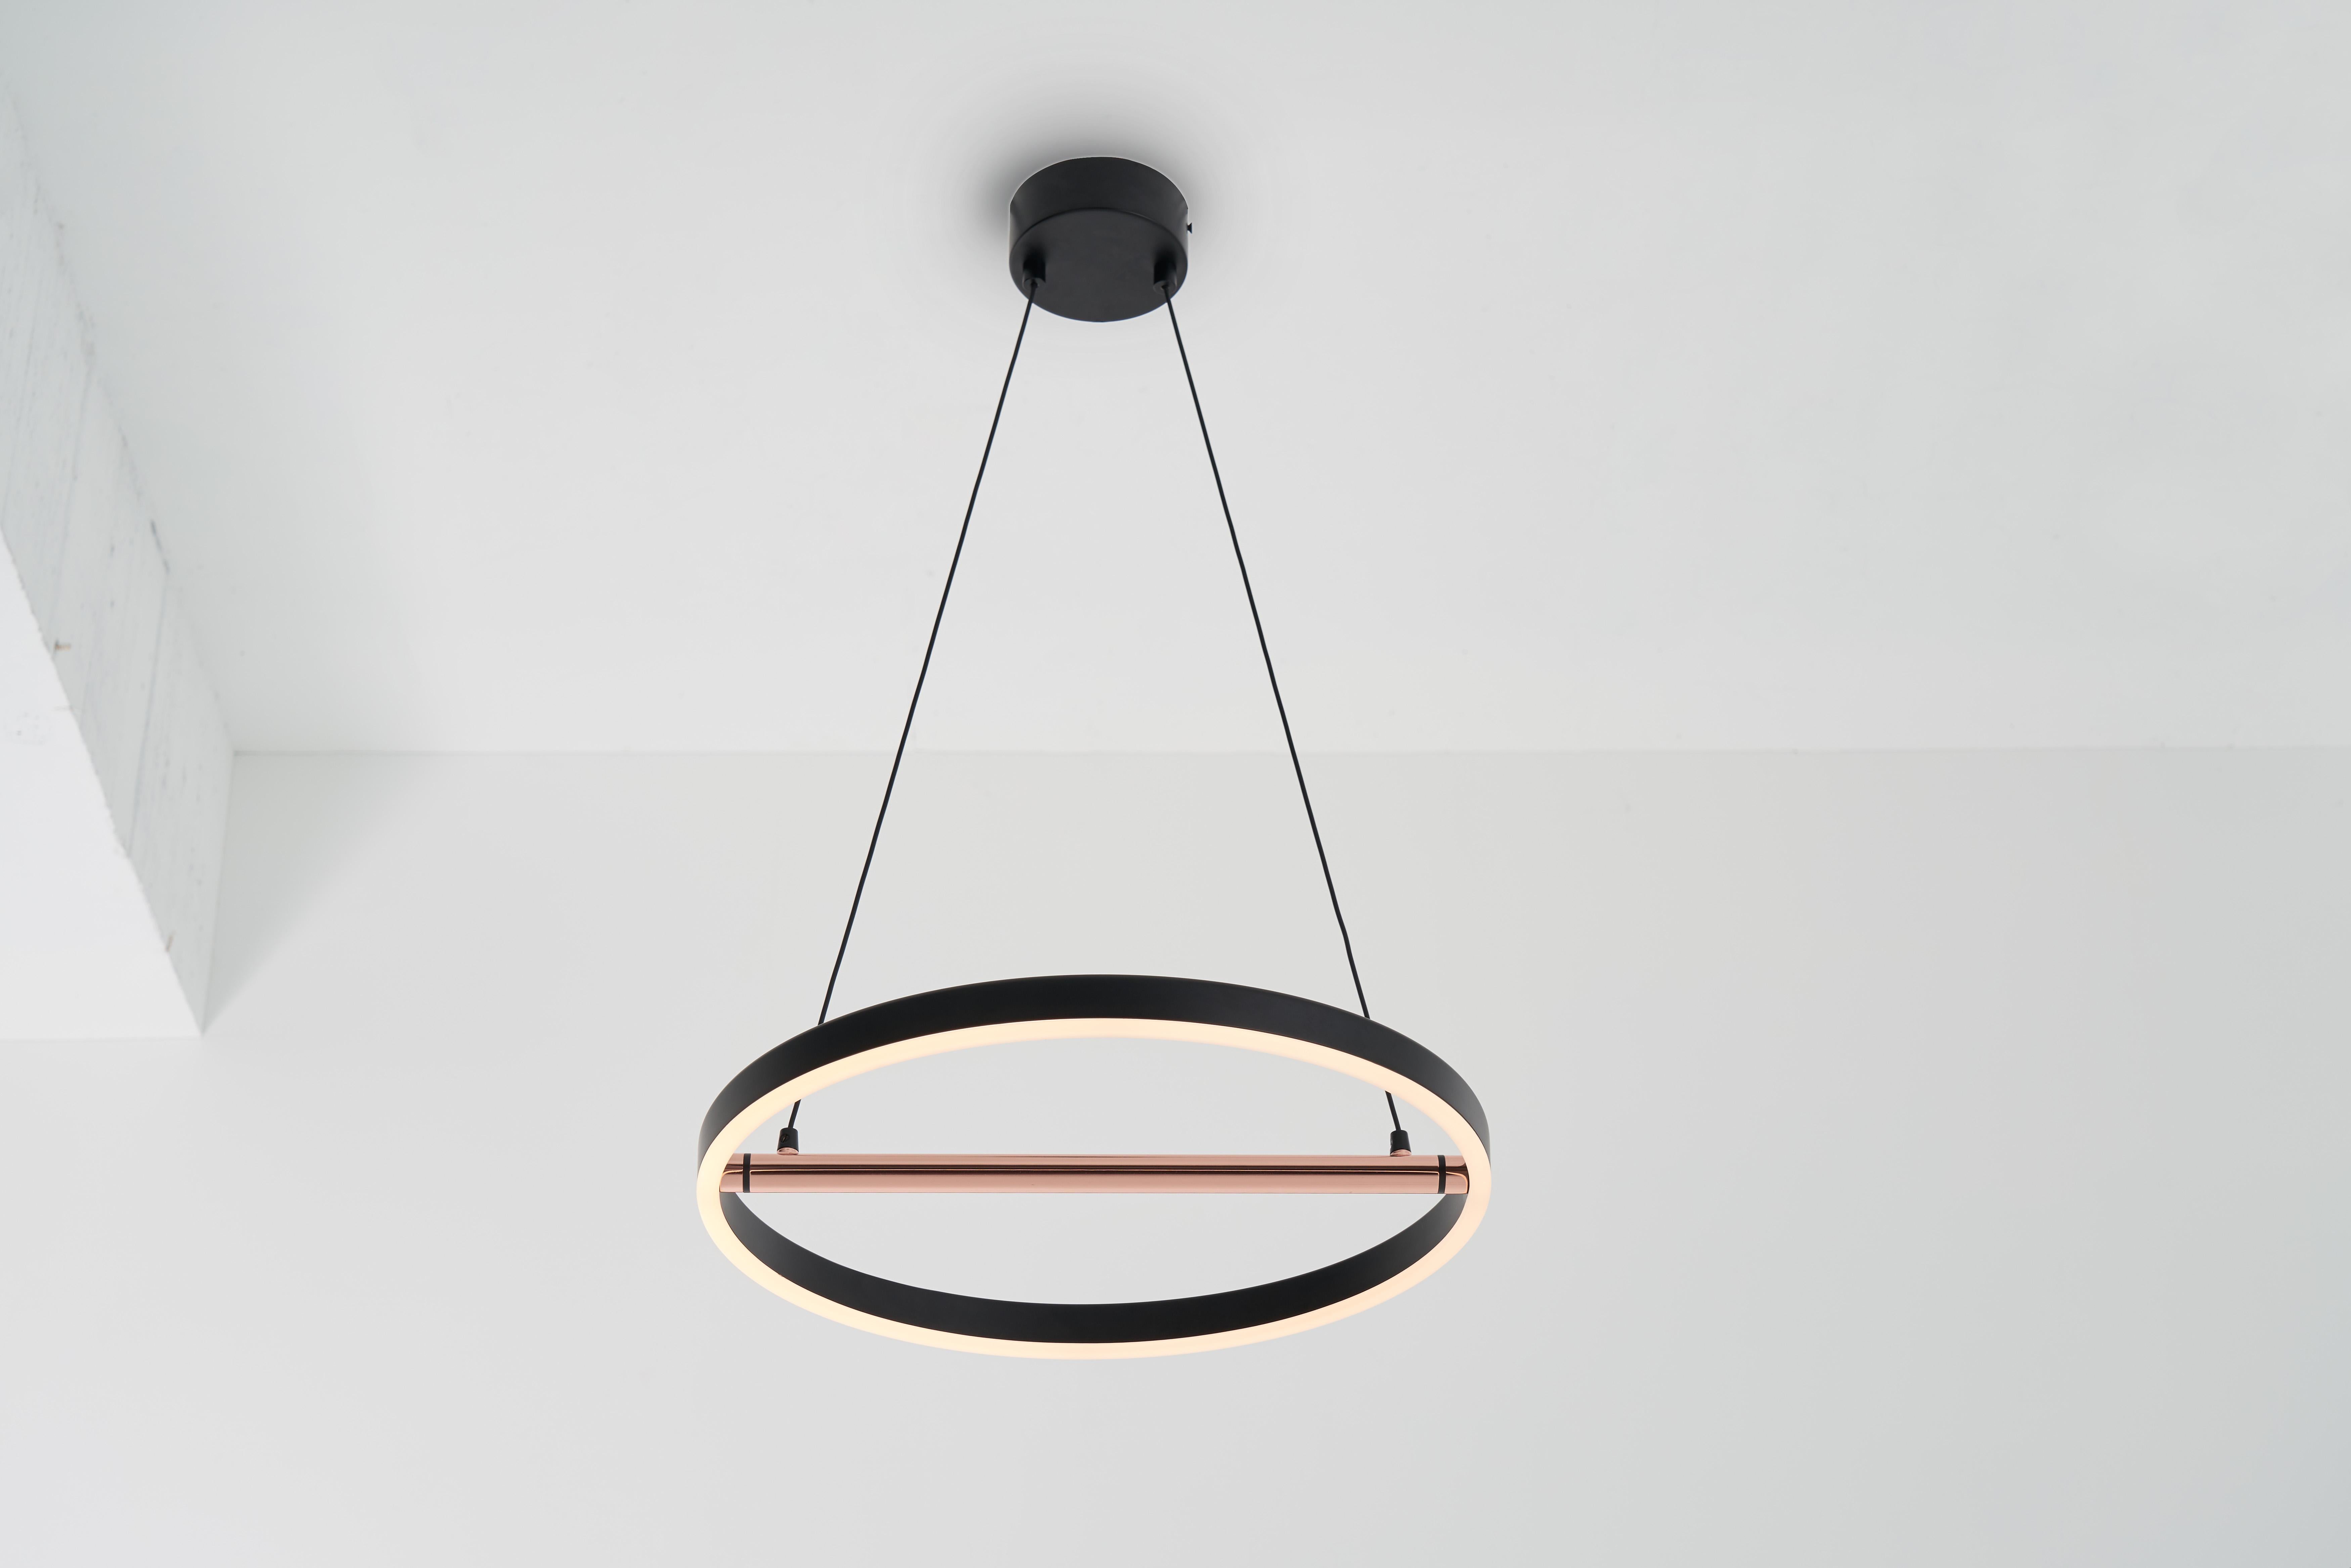 Sol collection is low-key design with elaborate consideration, consists of pendant, table lamp and even bow lamp type. SOL Pendant L ’s ring-like lampshade is finely affixed to a metallic luster balance bar, demonstrating the definition of